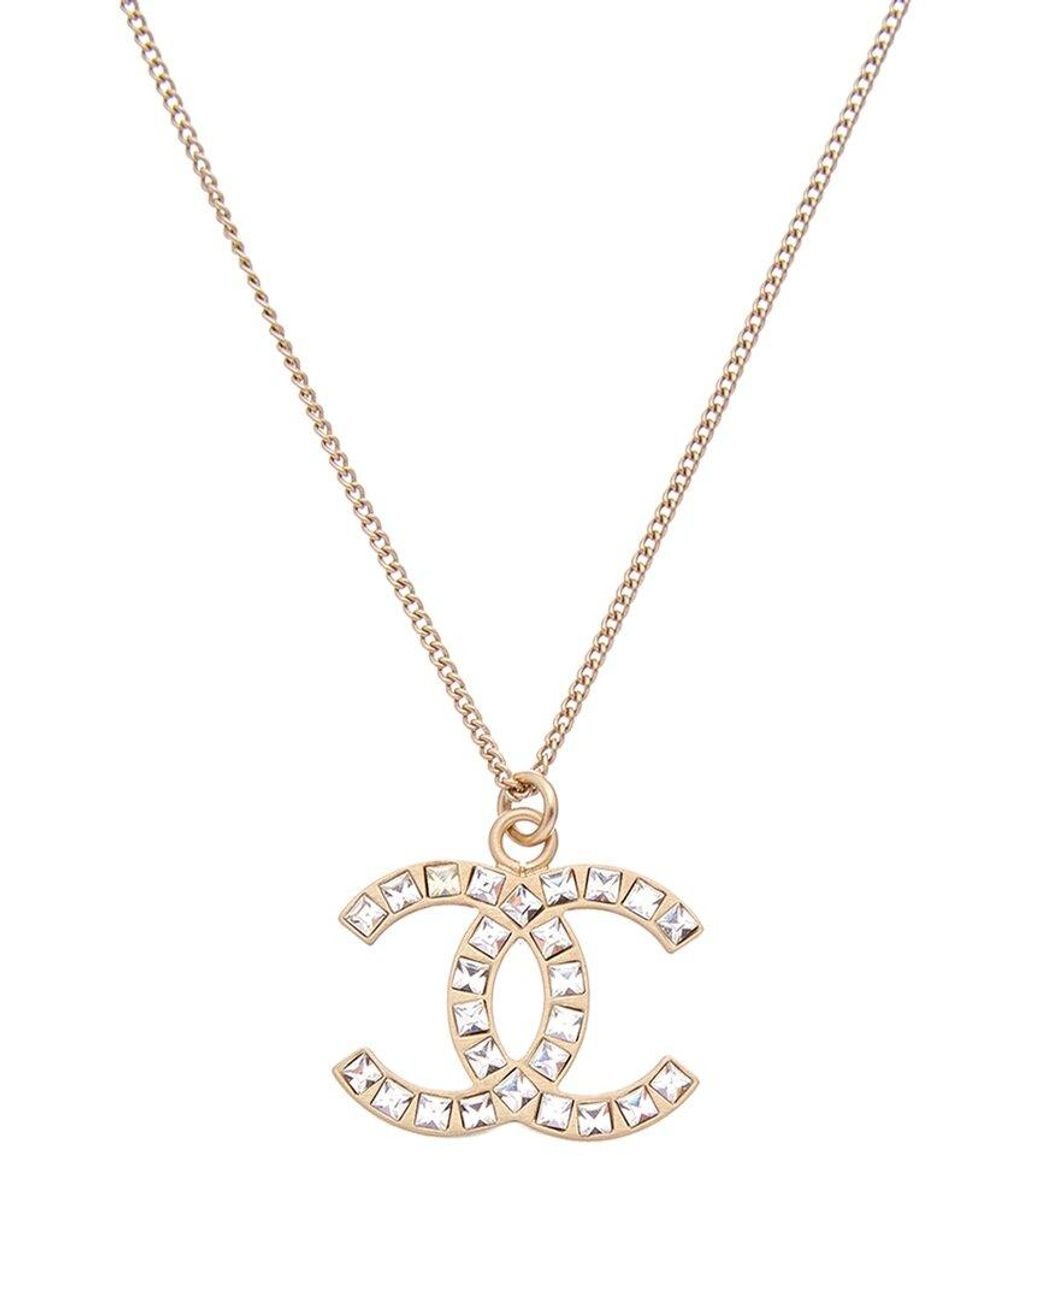 CHANEL, Jewelry, Ladies Chanel Necklace